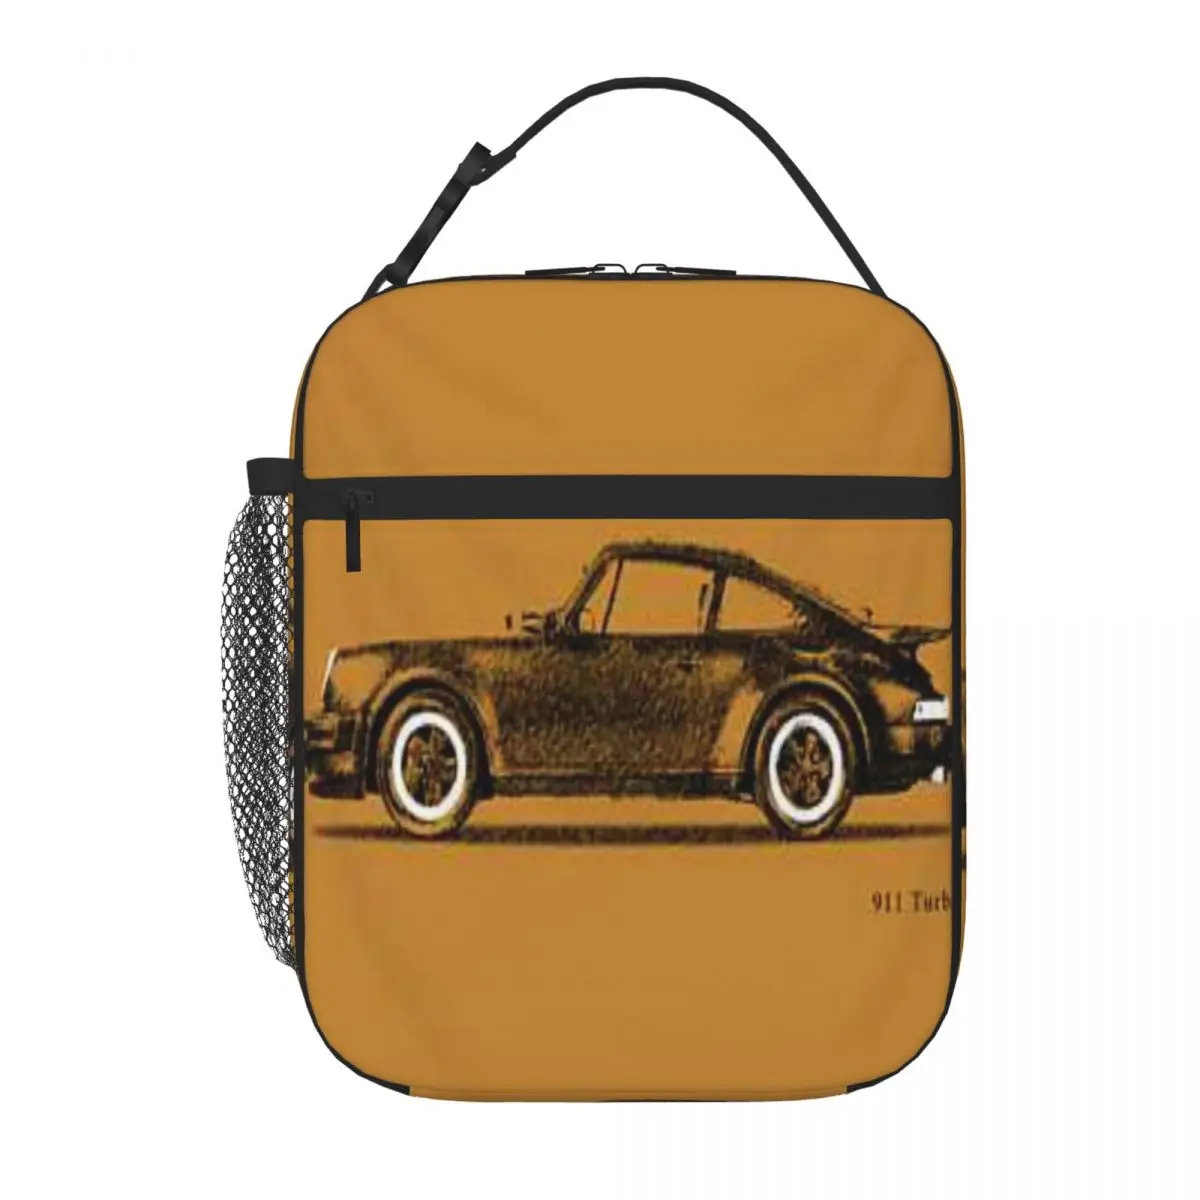 

911 Turbo Mark Rogan Transparent Lunch Tote Picnic Kids Lunch Bag Lunch Box Thermal